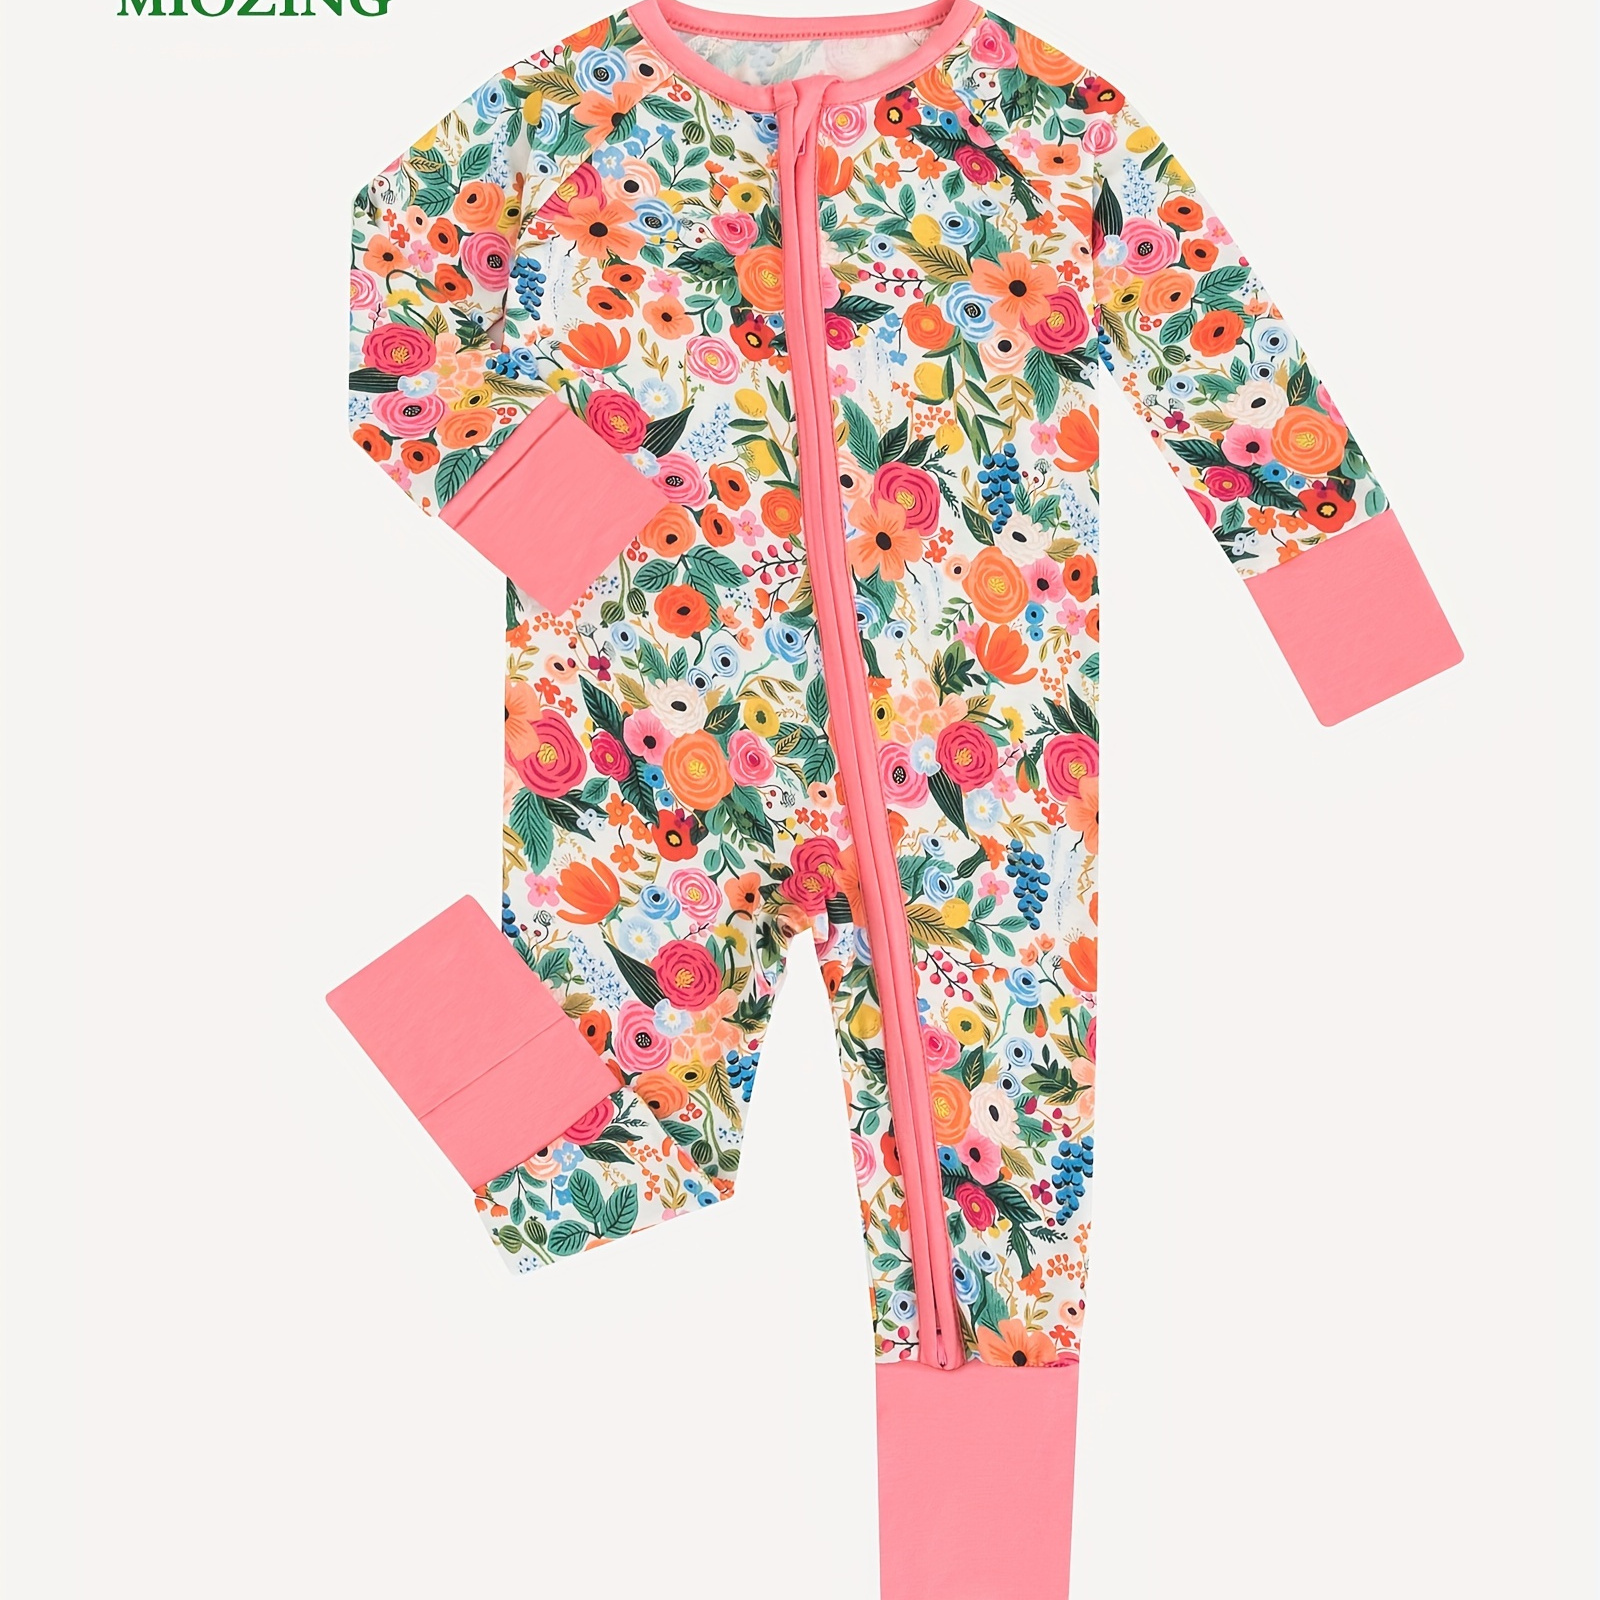 

Miozing Baby Girls Comfy High-end Bamboo Rose Flower Cute & Elastic One-piece Bodysuit